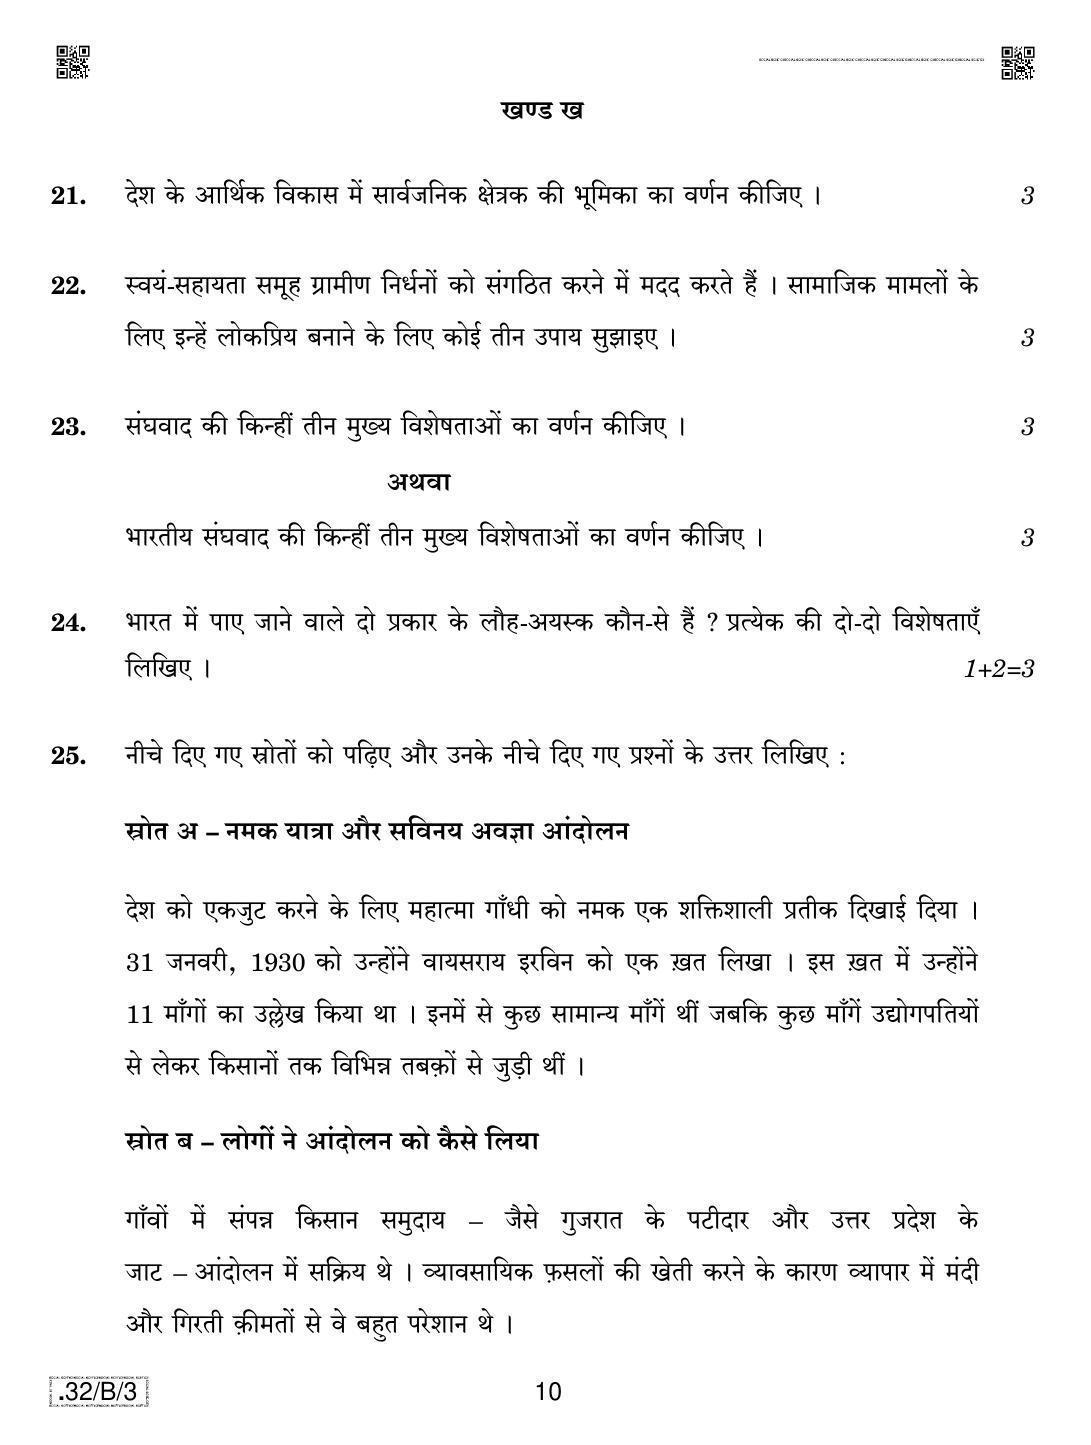 CBSE Class 10 32-C-3 Social Science 2020 Compartment Question Paper - Page 10